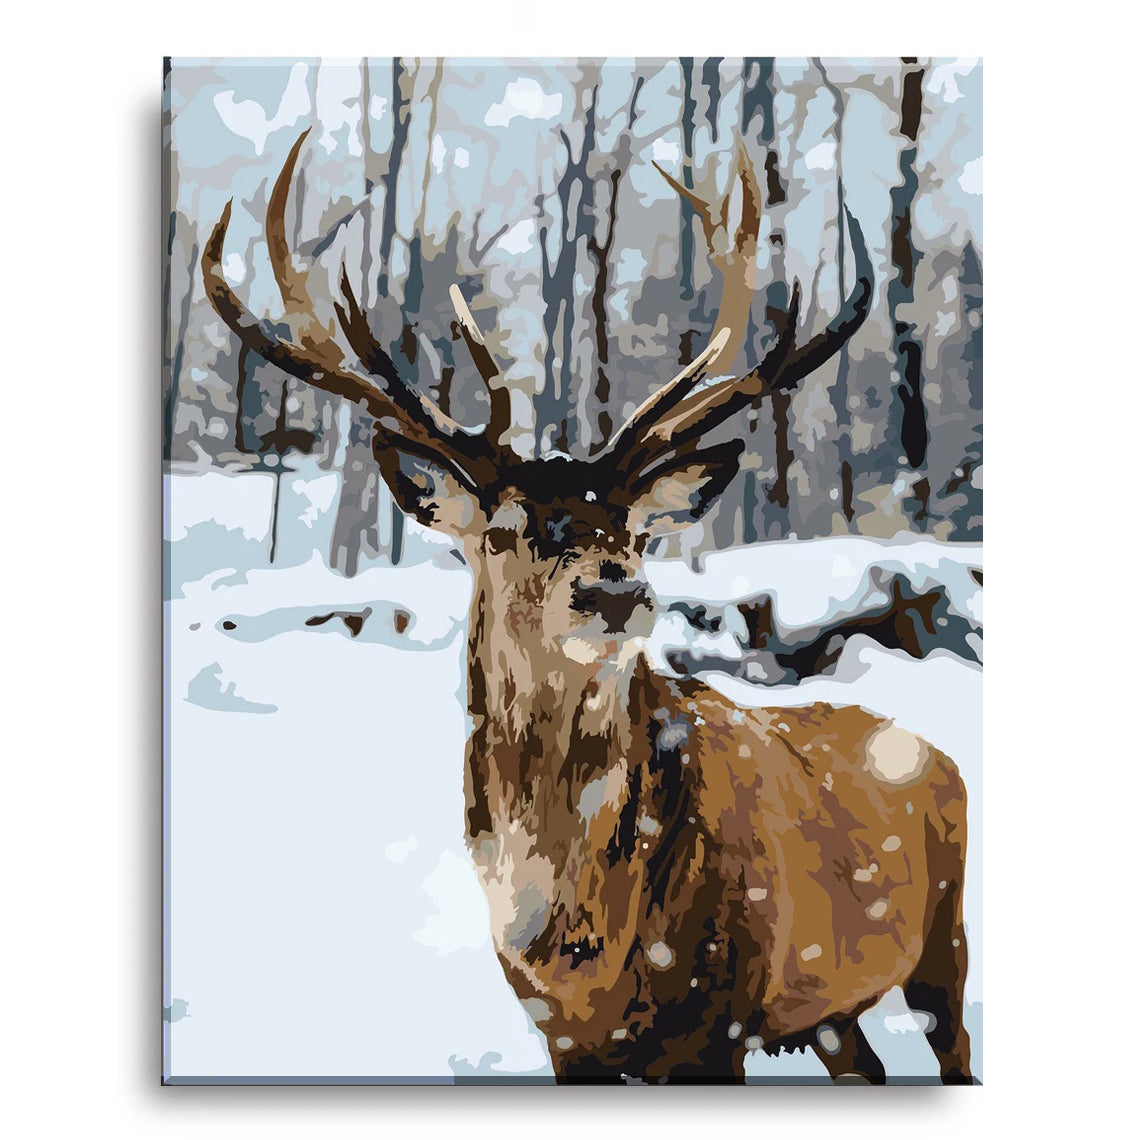 The Elk - Paint by Numbers Kit for Adults DIY Oil Painting Kit on Canvas